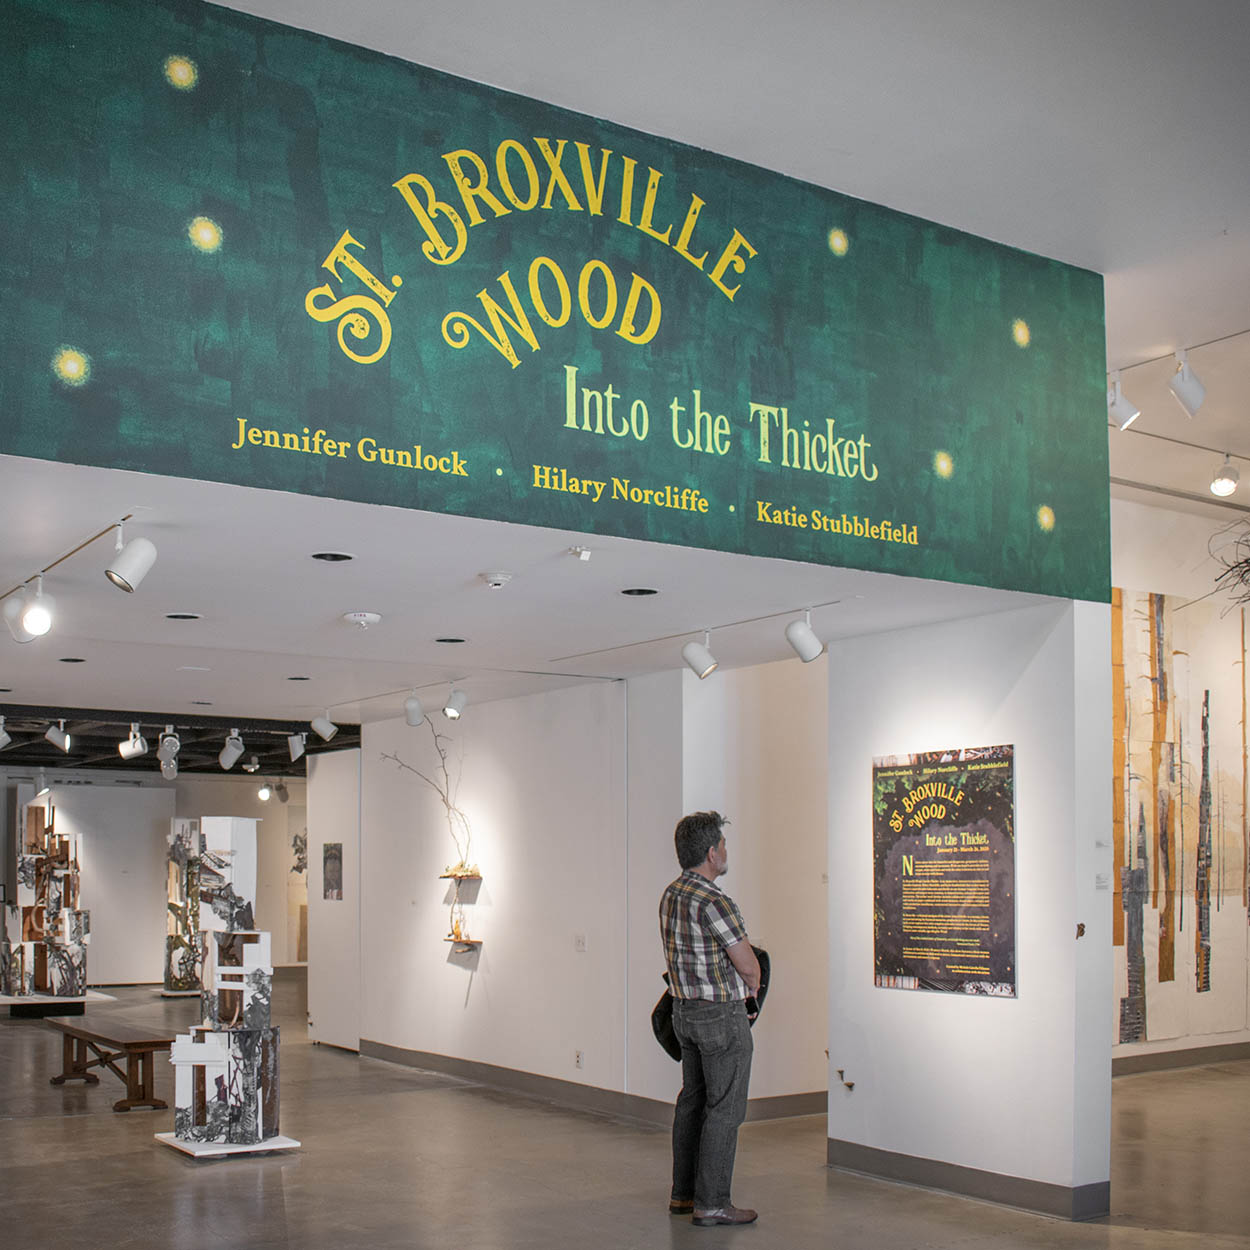 image of gallery title wall painted green with yellow letters: St. Broxville Wood: Into the Thicket. 